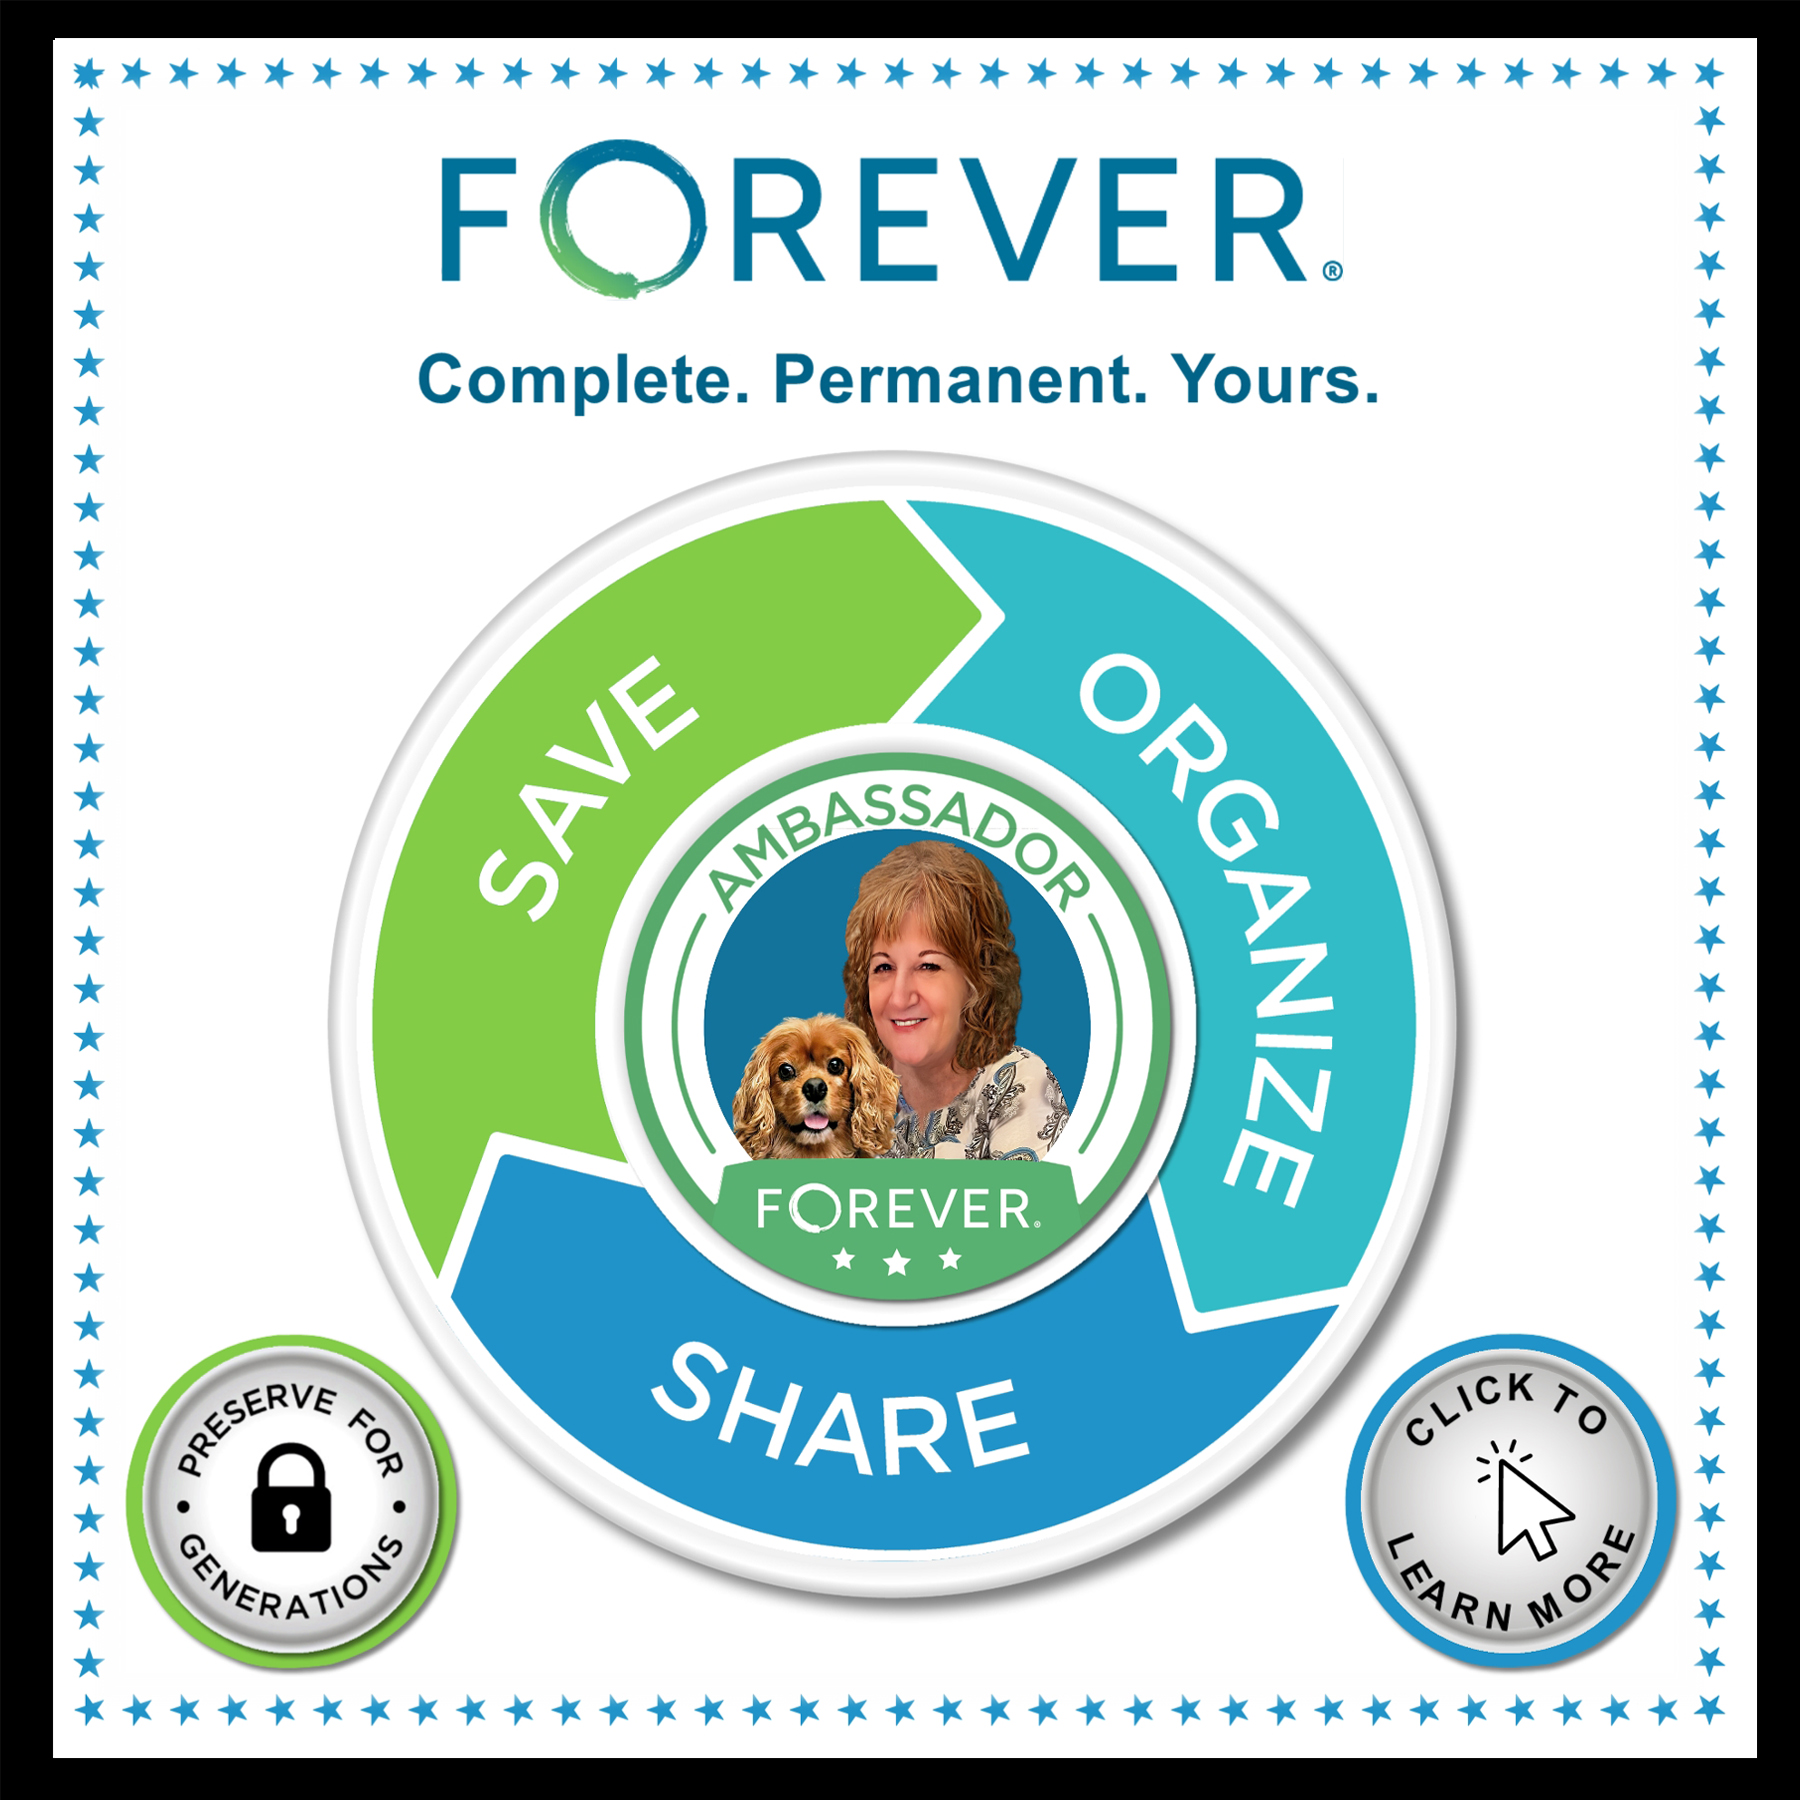 Forever - Your Complete Memory Solution